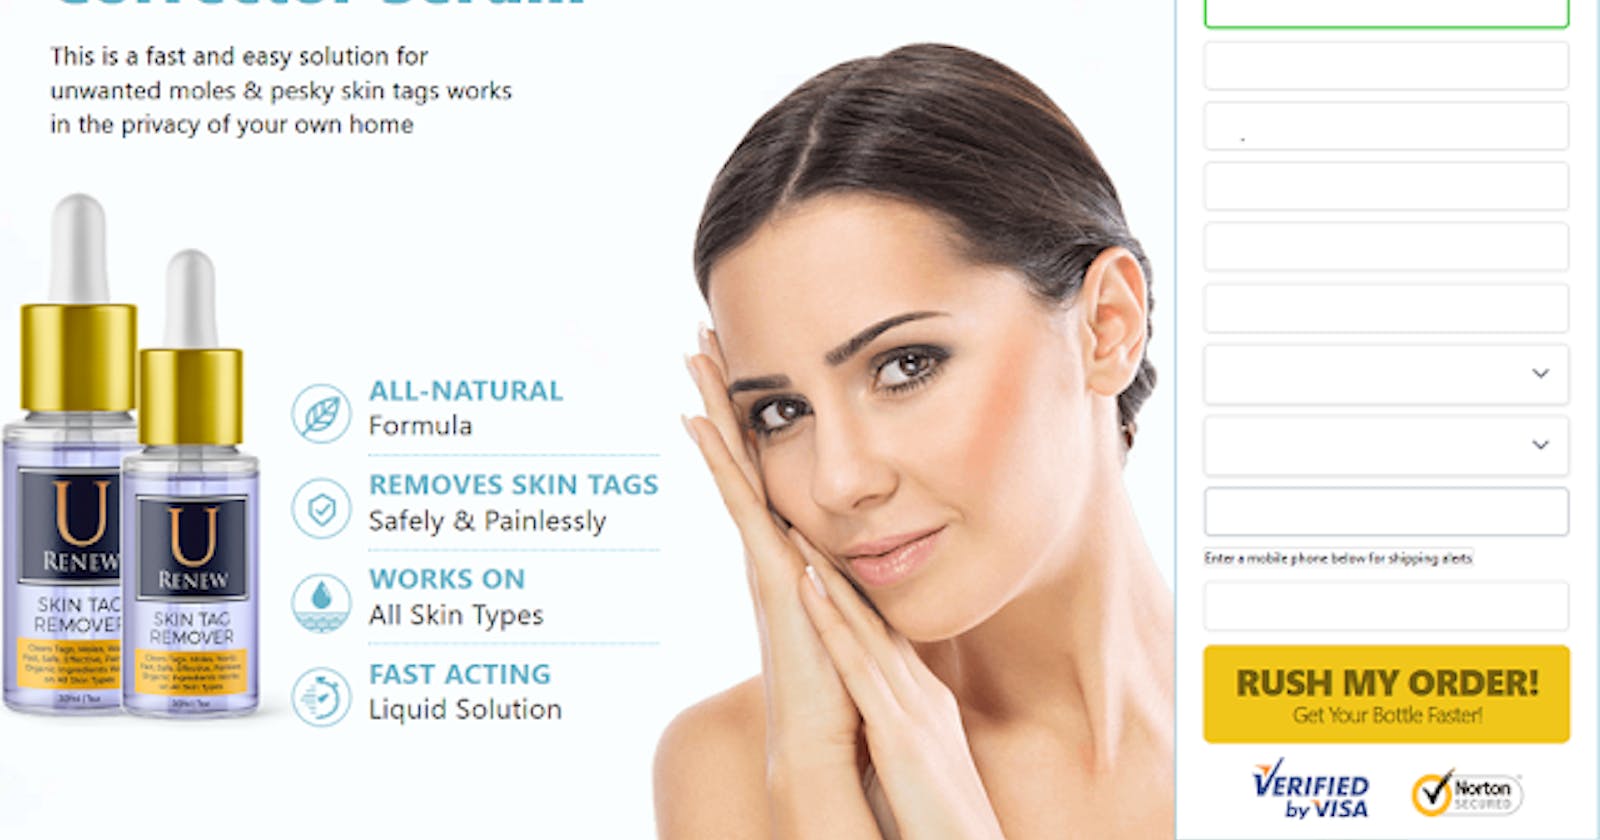 U Renew Skin Tag Remover - Remove Skin Tags In One Night !Ingredients Price, Where To Buy?